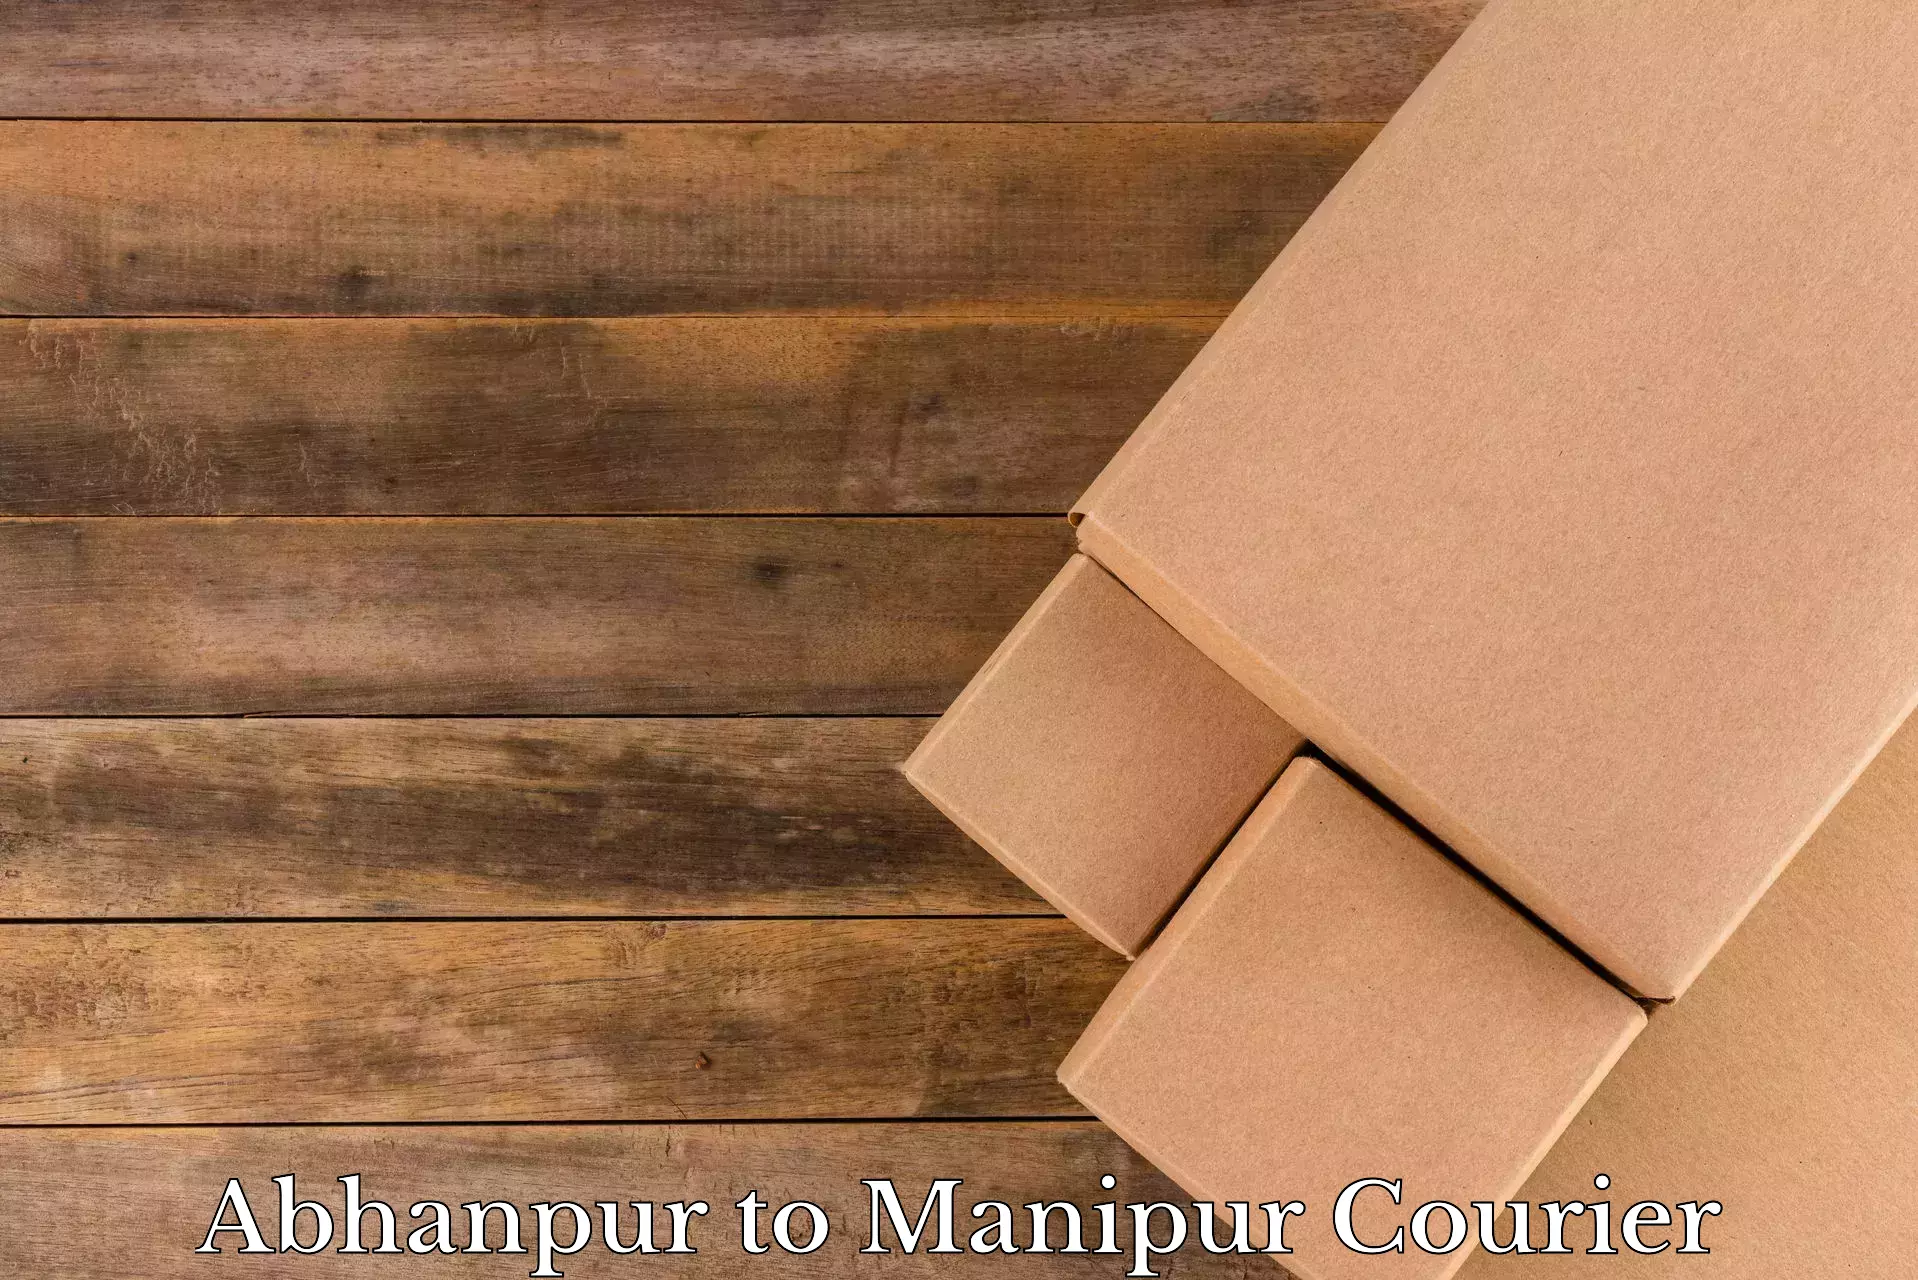 Full-service relocation in Abhanpur to Manipur